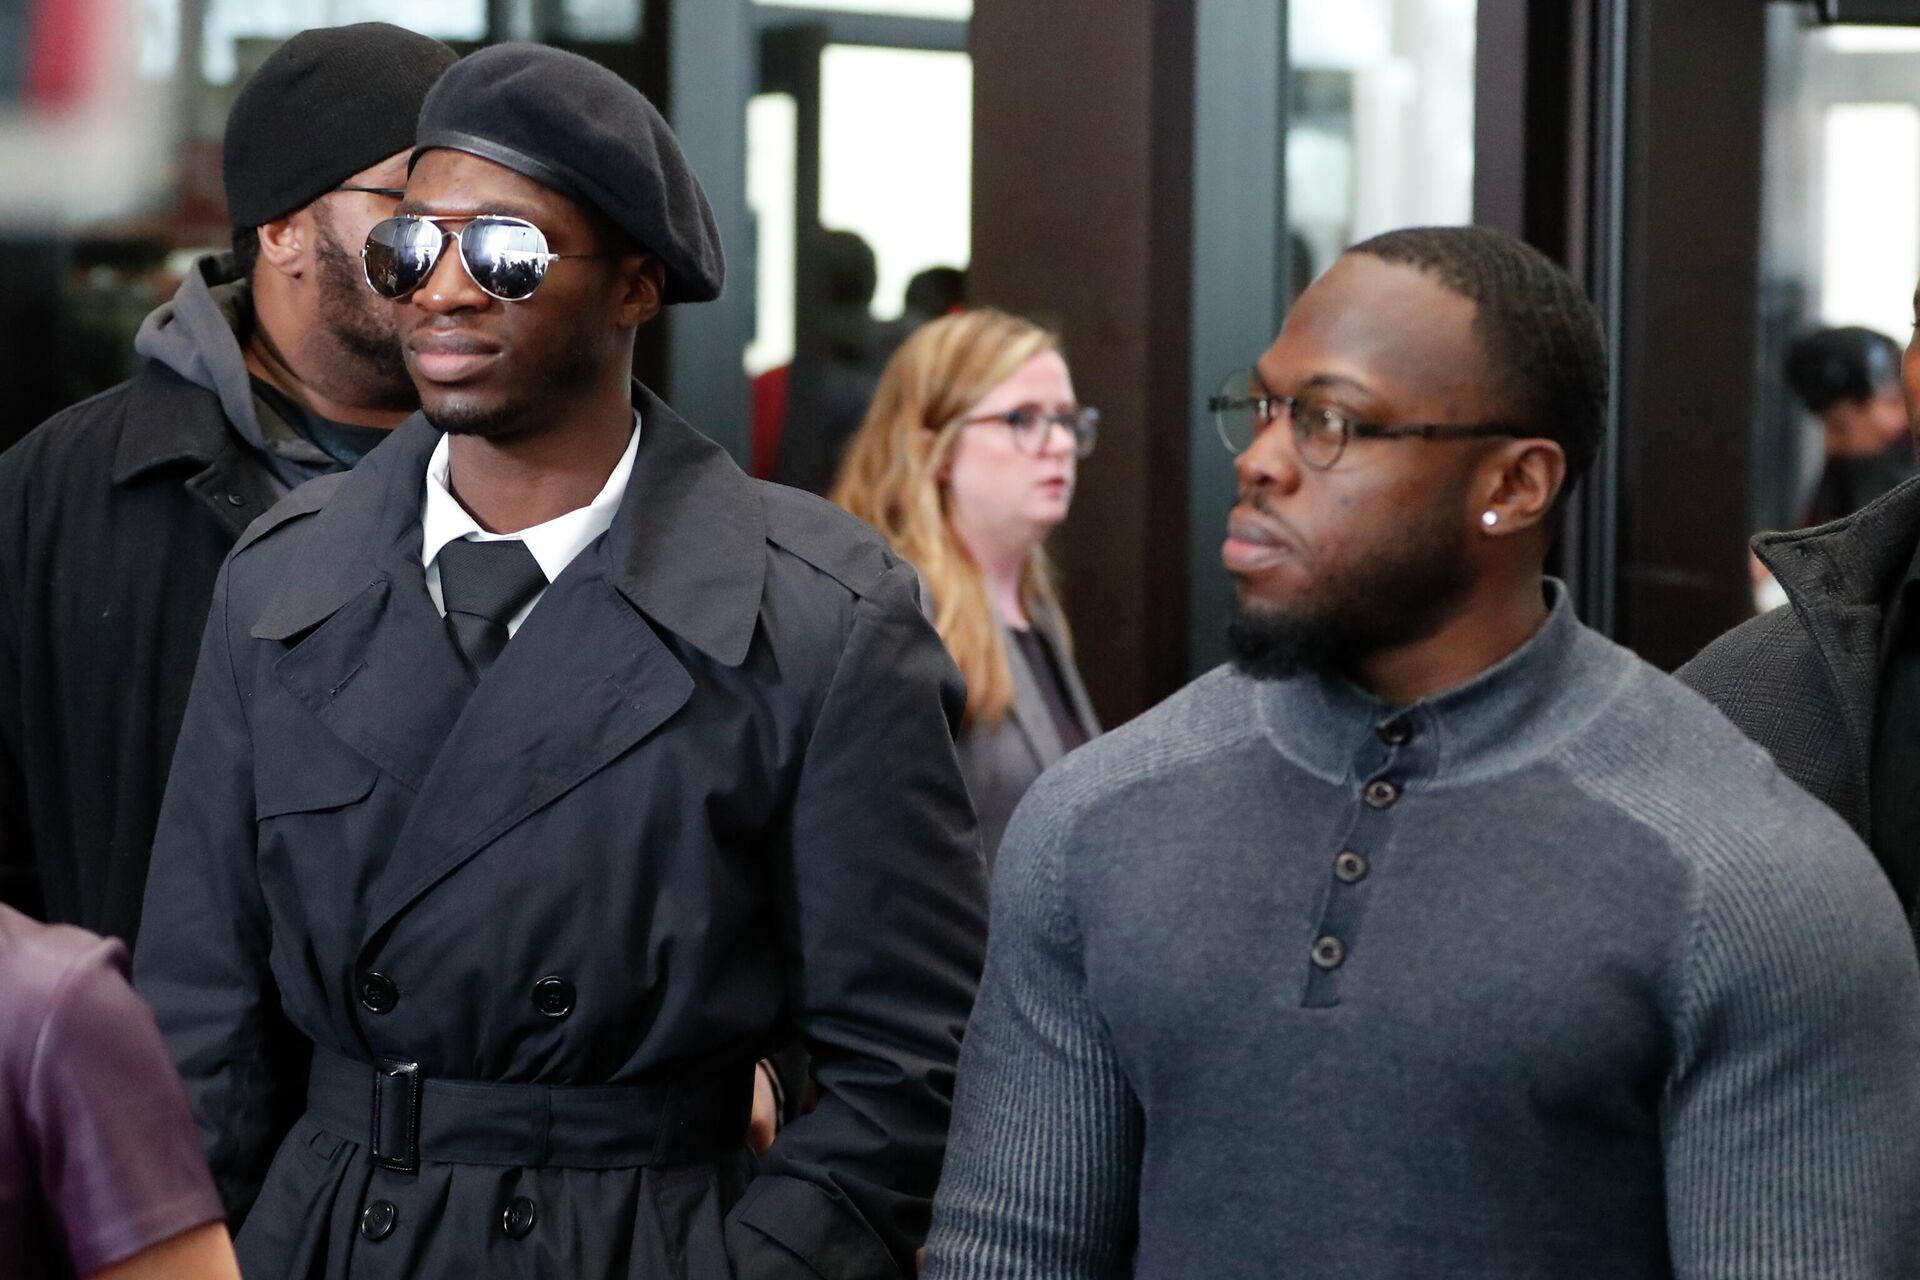 Brothers Olabinjo Osundairo, right, and Abimbola Osundairo, who claim actor Jussie Smollett hired them to stage an attack on him, appear outside the Leighton Criminal Courthouse in Chicago, Monday, Feb. 24, 2020, after Smollett's court appearance on a new set of charges alleging that he lied to police about being targeted in a racist and homophobic attack in downtown Chicago early last year. - Sputnik International, 1920, 01.12.2021